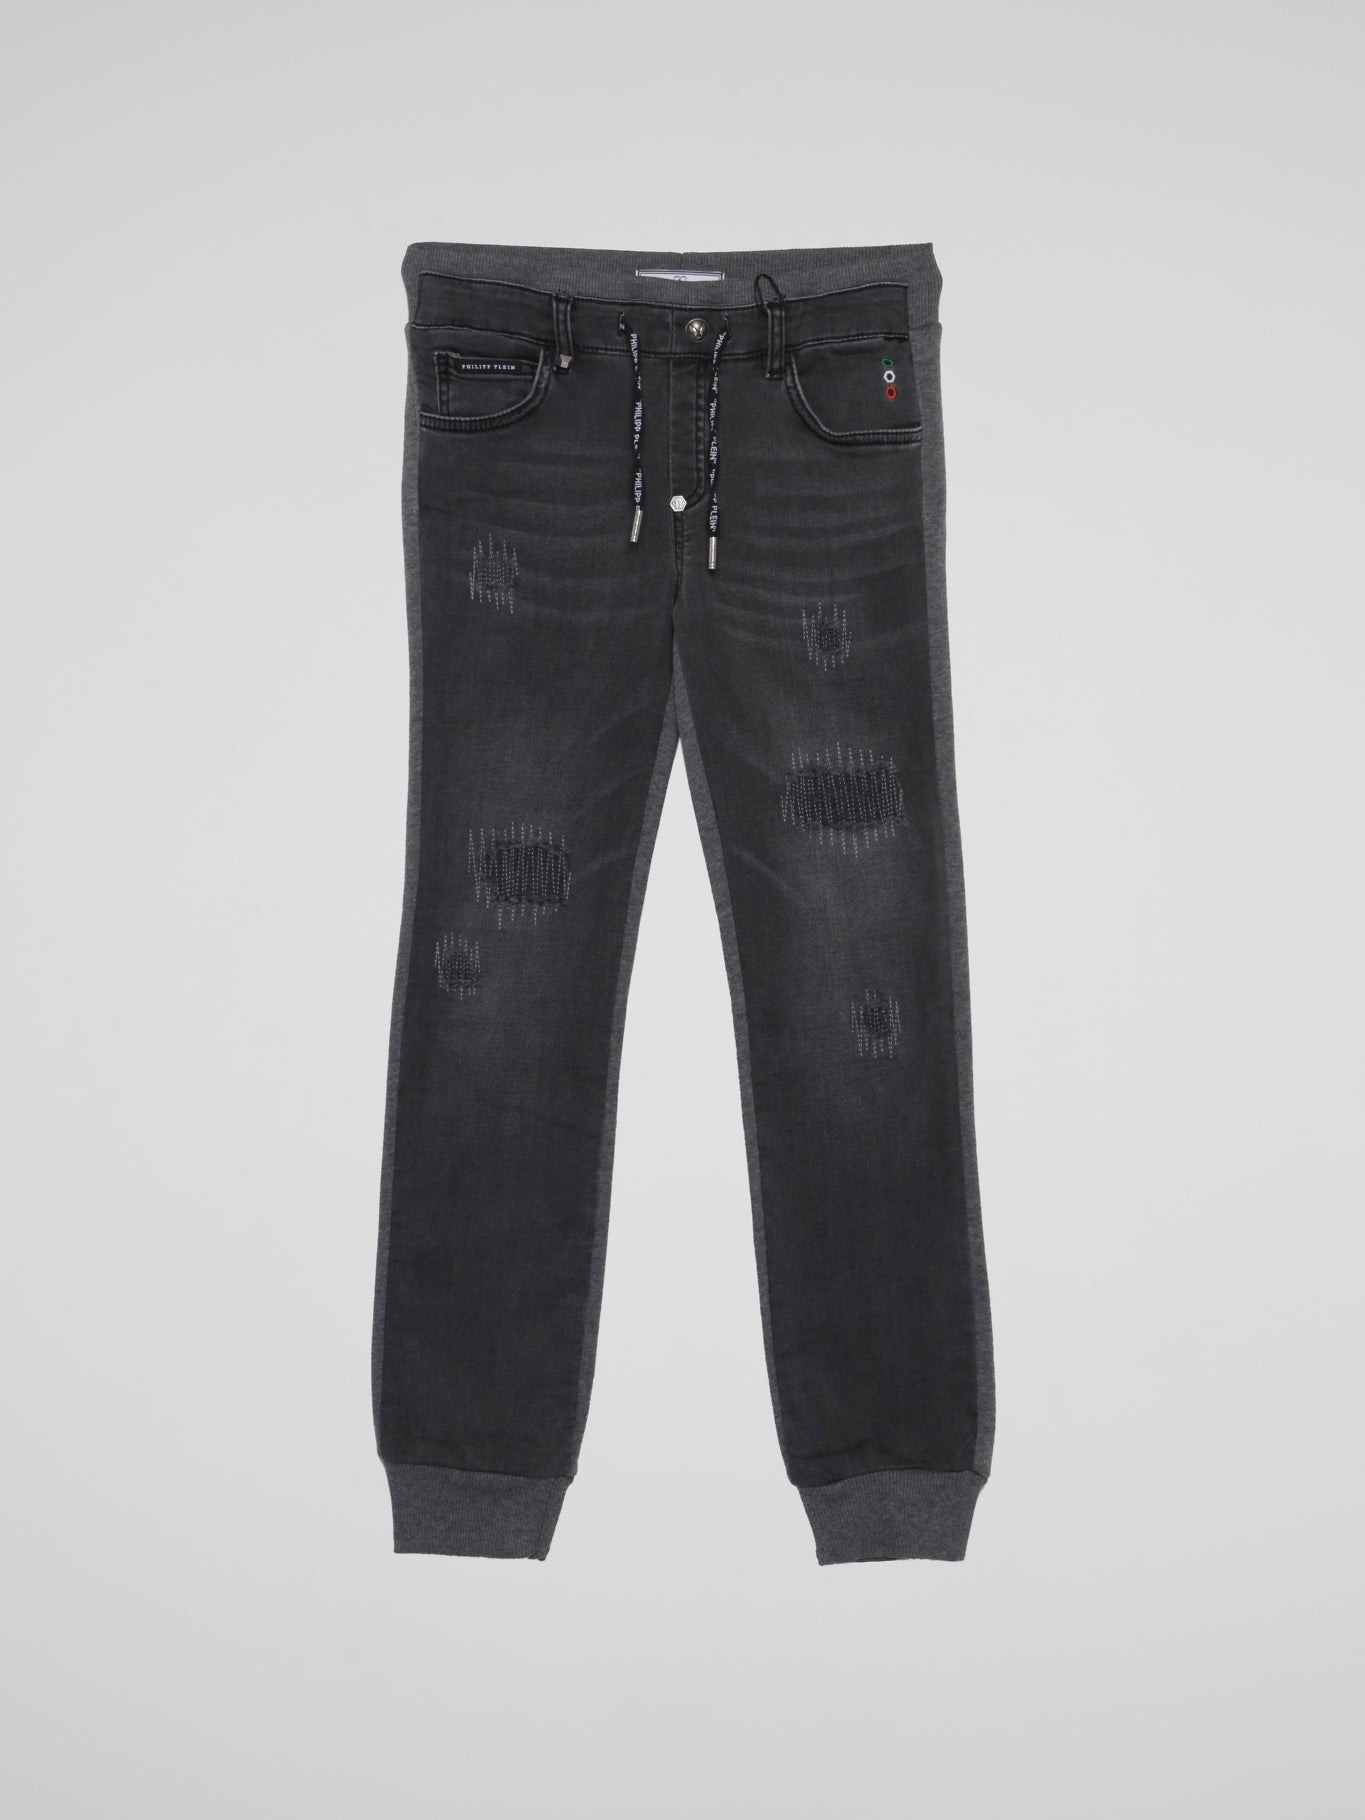 Grey Distressed Baggy Trousers (Kids)